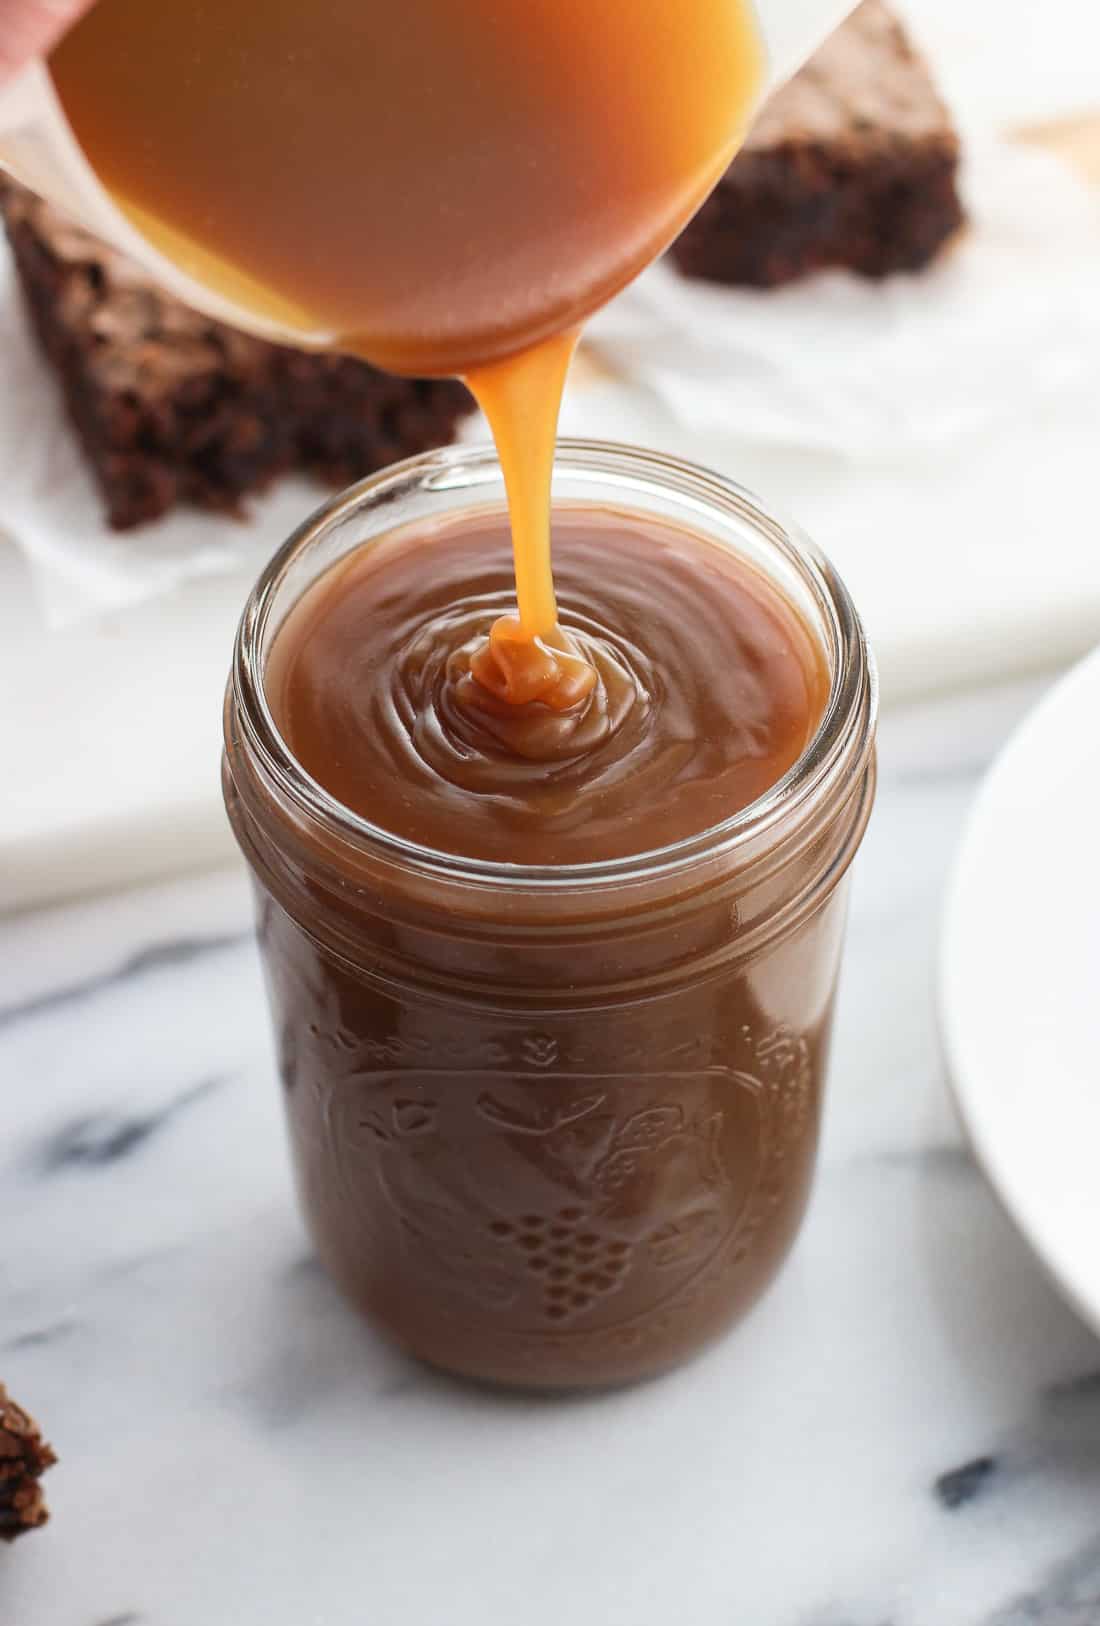 Caramel sauce being poured into a glass mason jar with a batch of brownies on a board in the background.